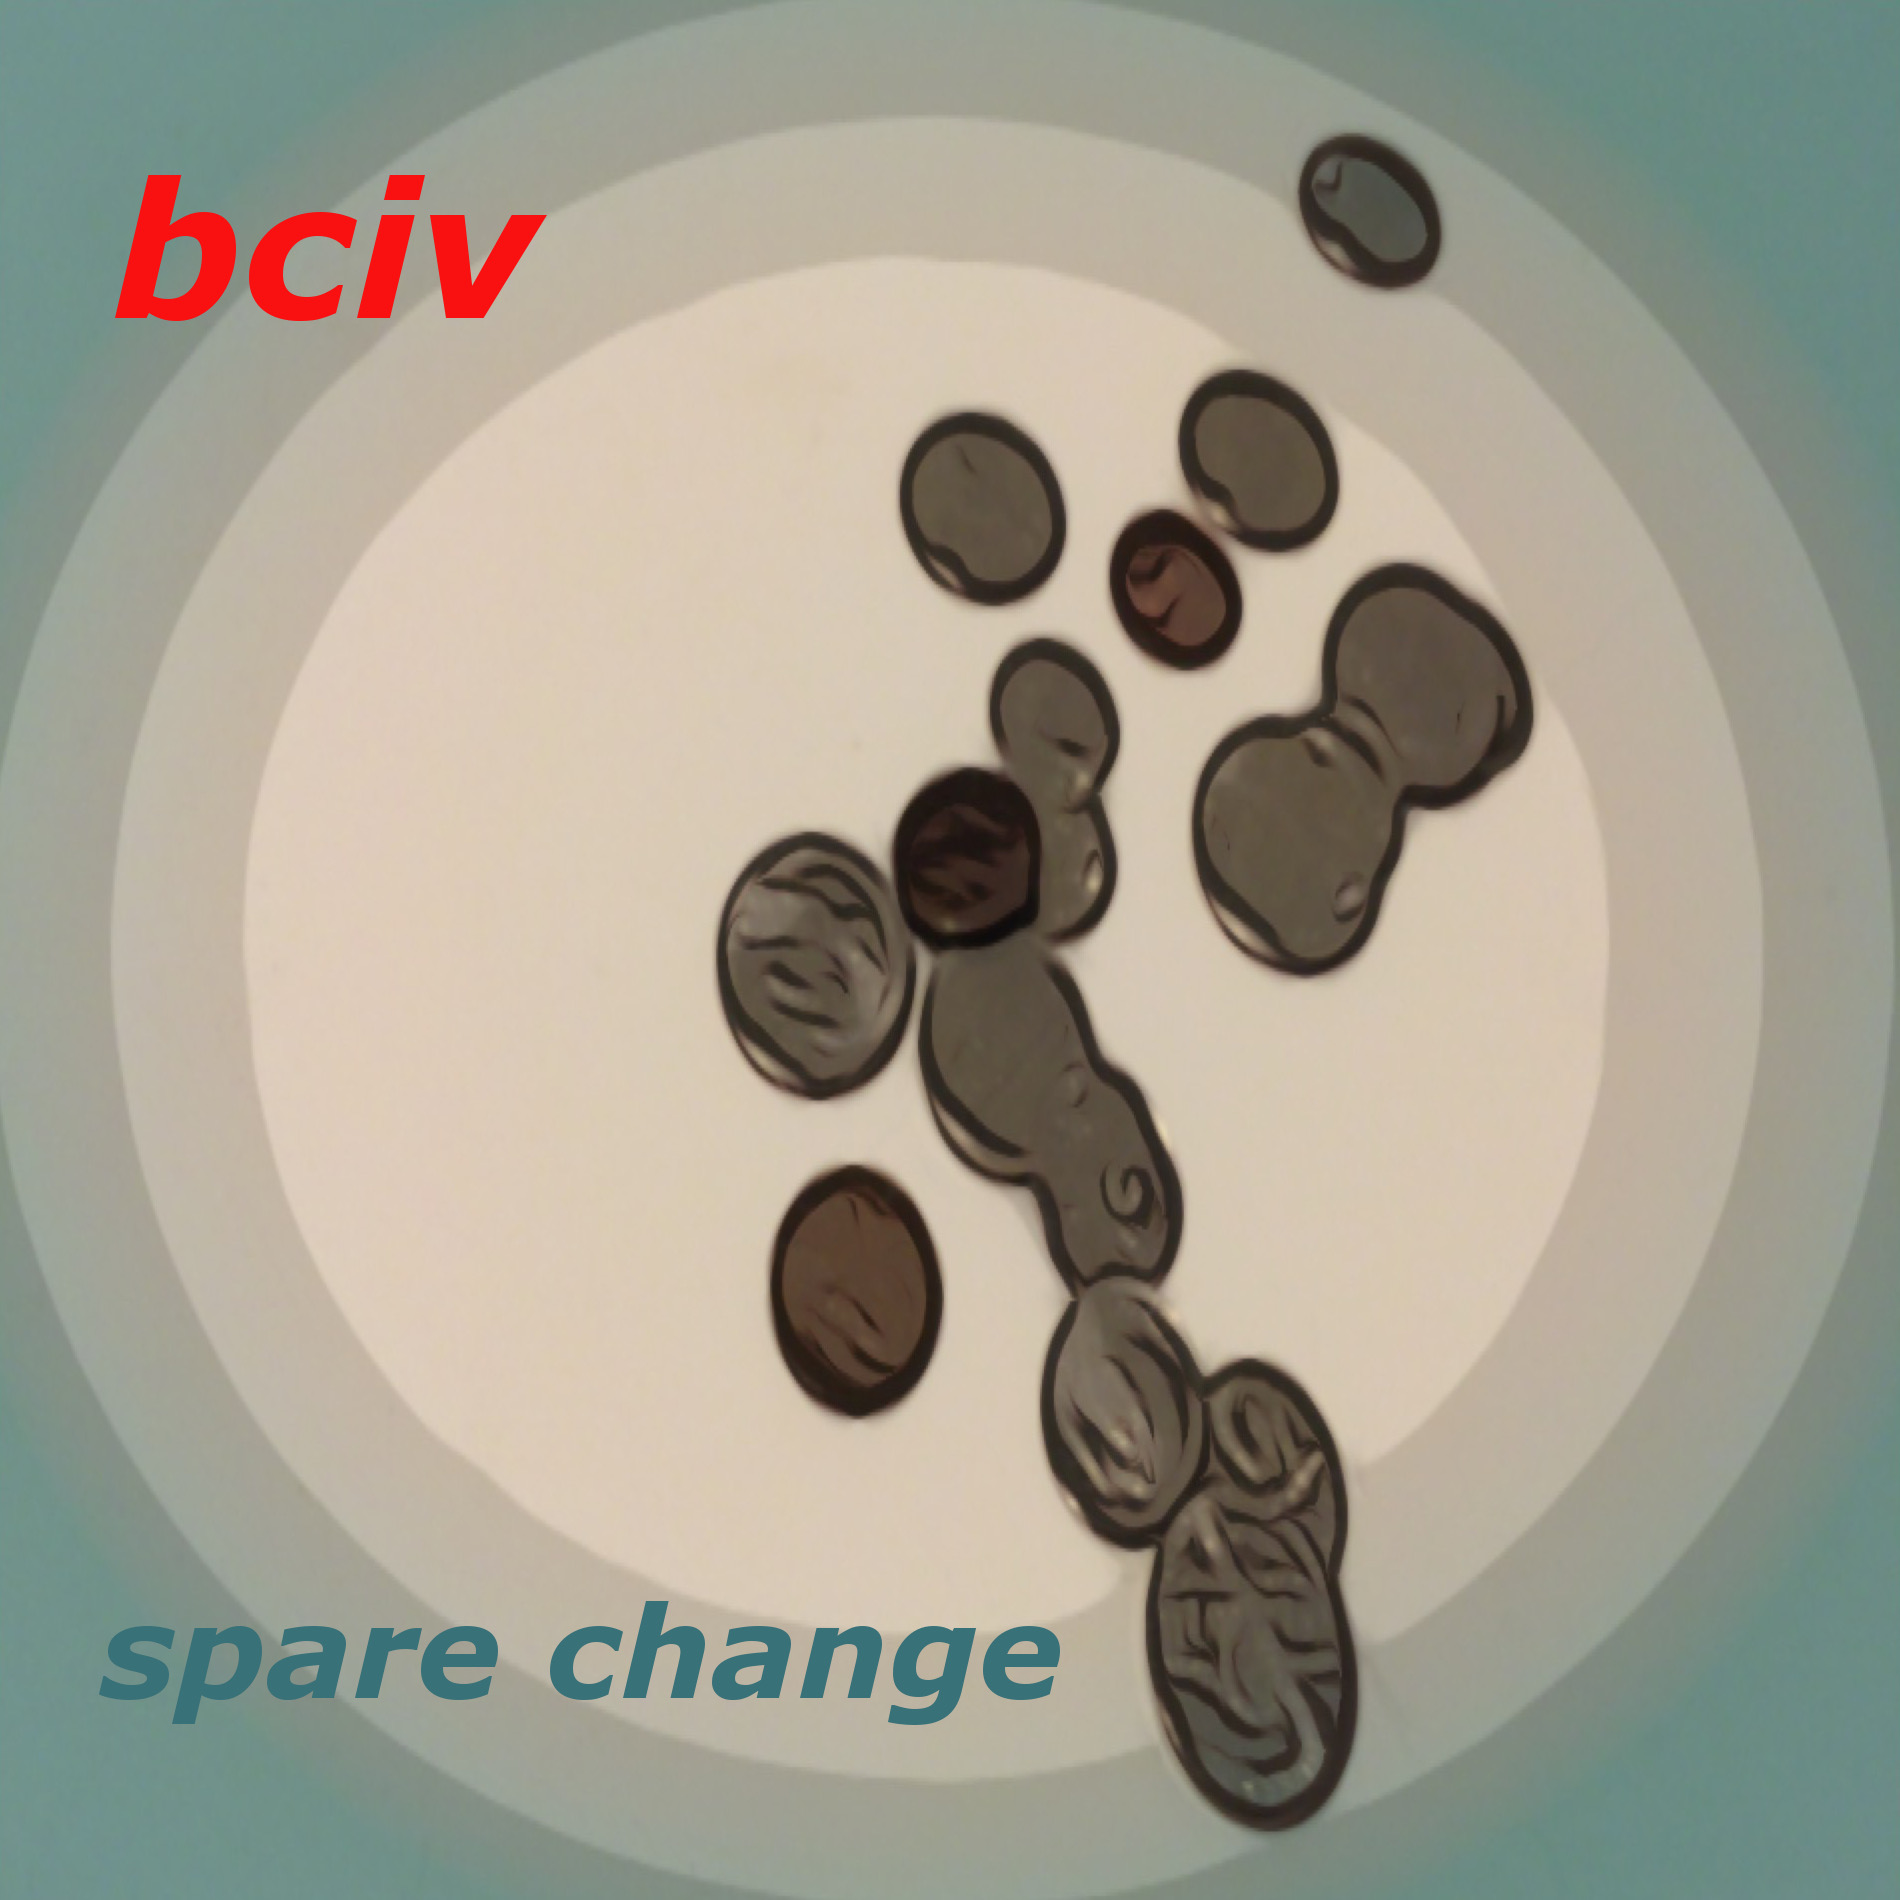 Album cover for Spare Change album. Cartoonized silver coins lay on a turquoise background.